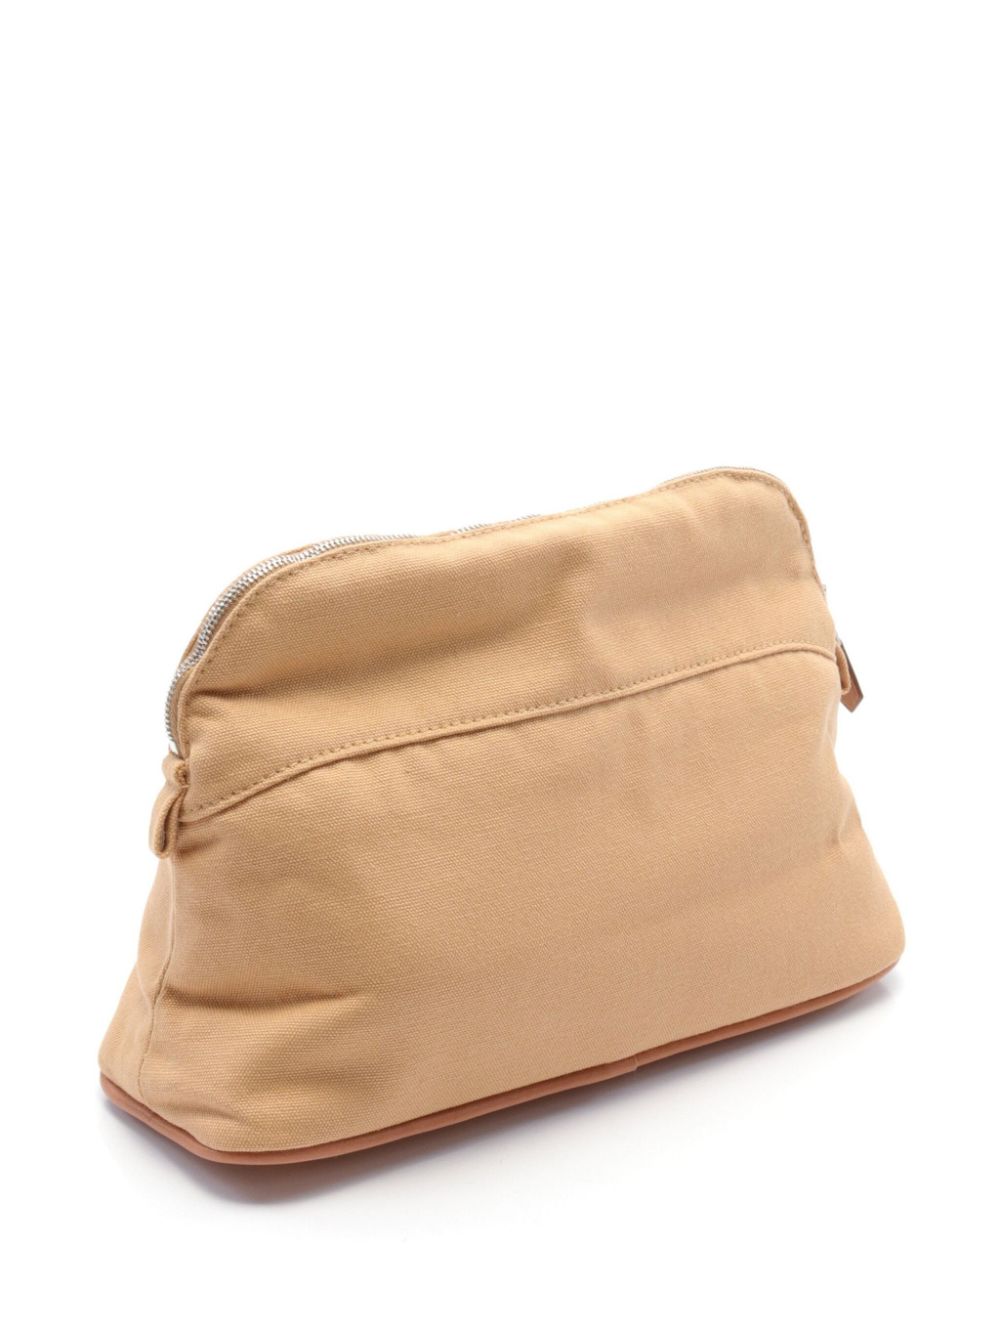 Hermès Pre-Owned 2010s Bolide Pouch 25 make-up bag - Beige